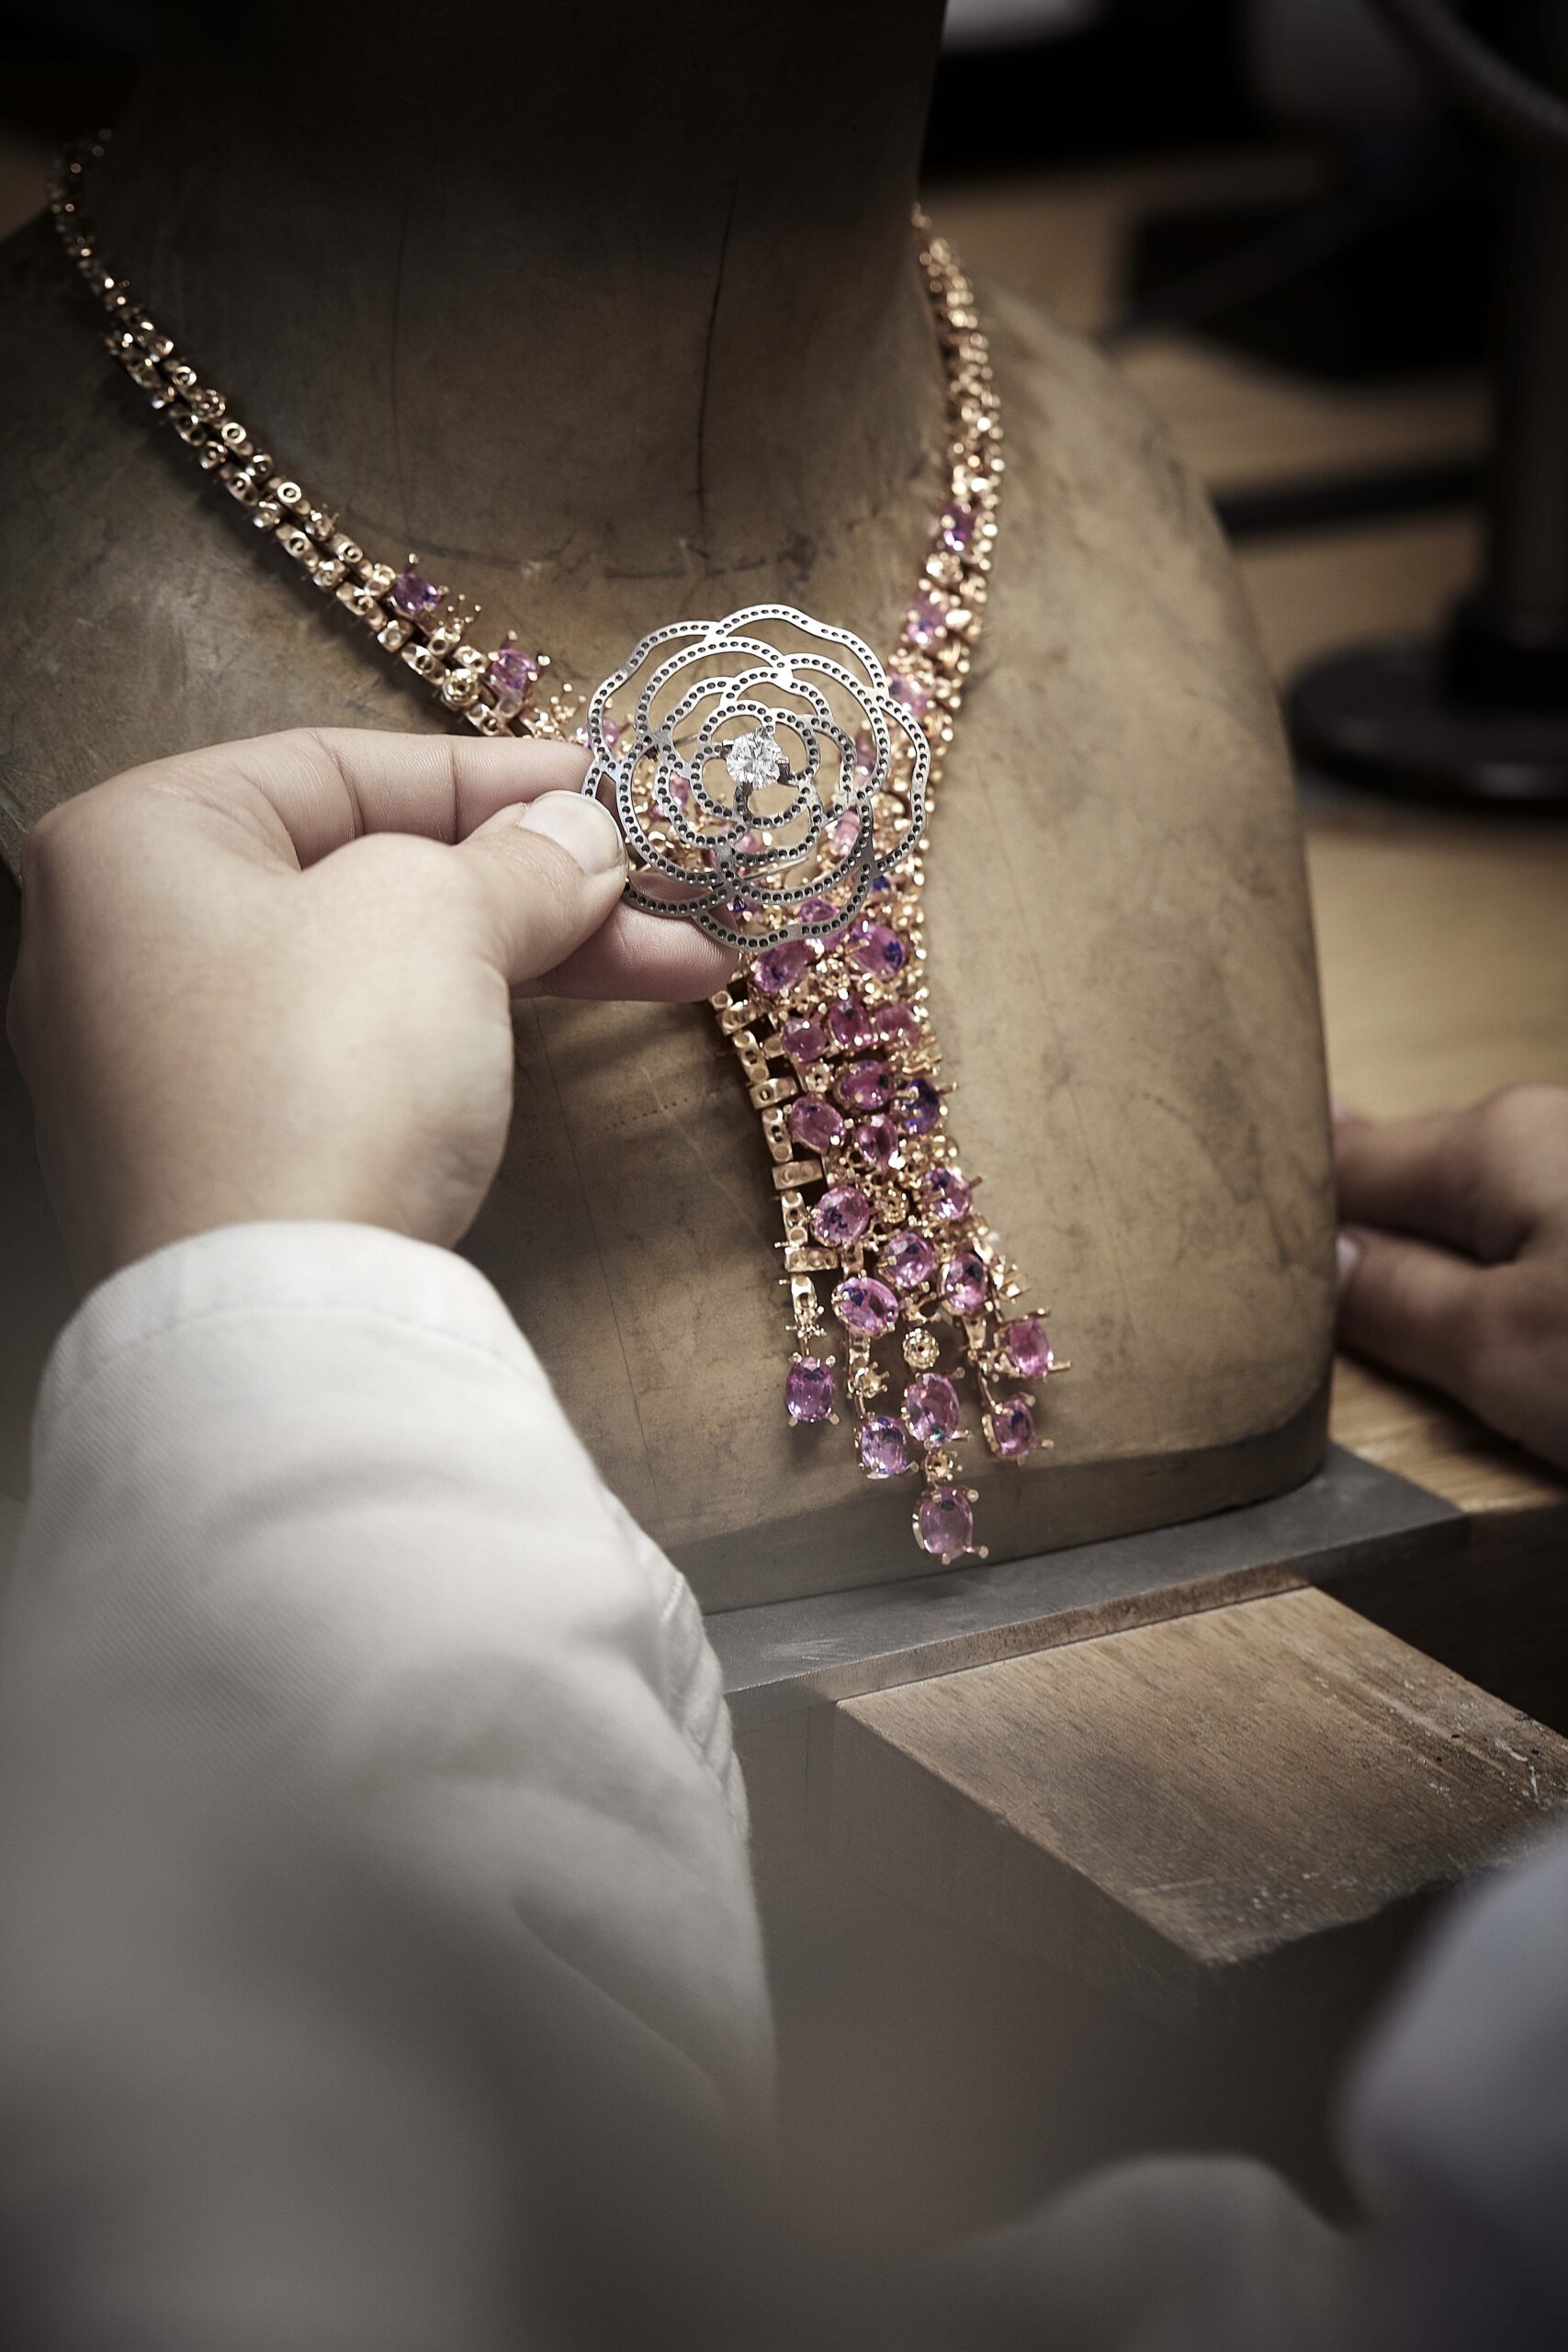 Chanel's New High Jewelry Collection Celebrates the Camellia